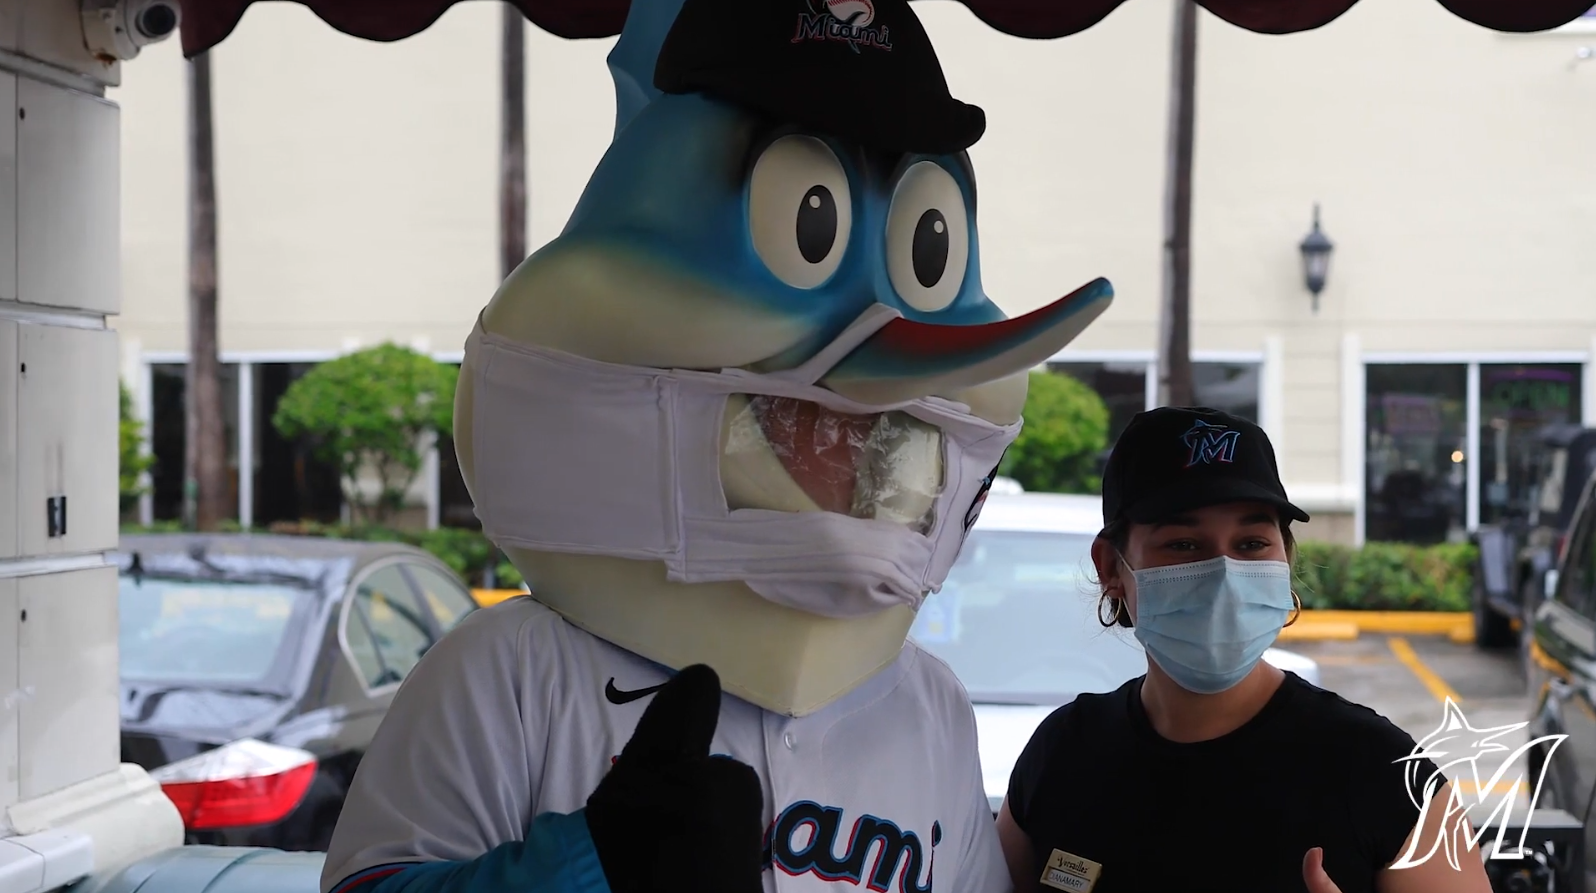 Image result for marlin mascot costume